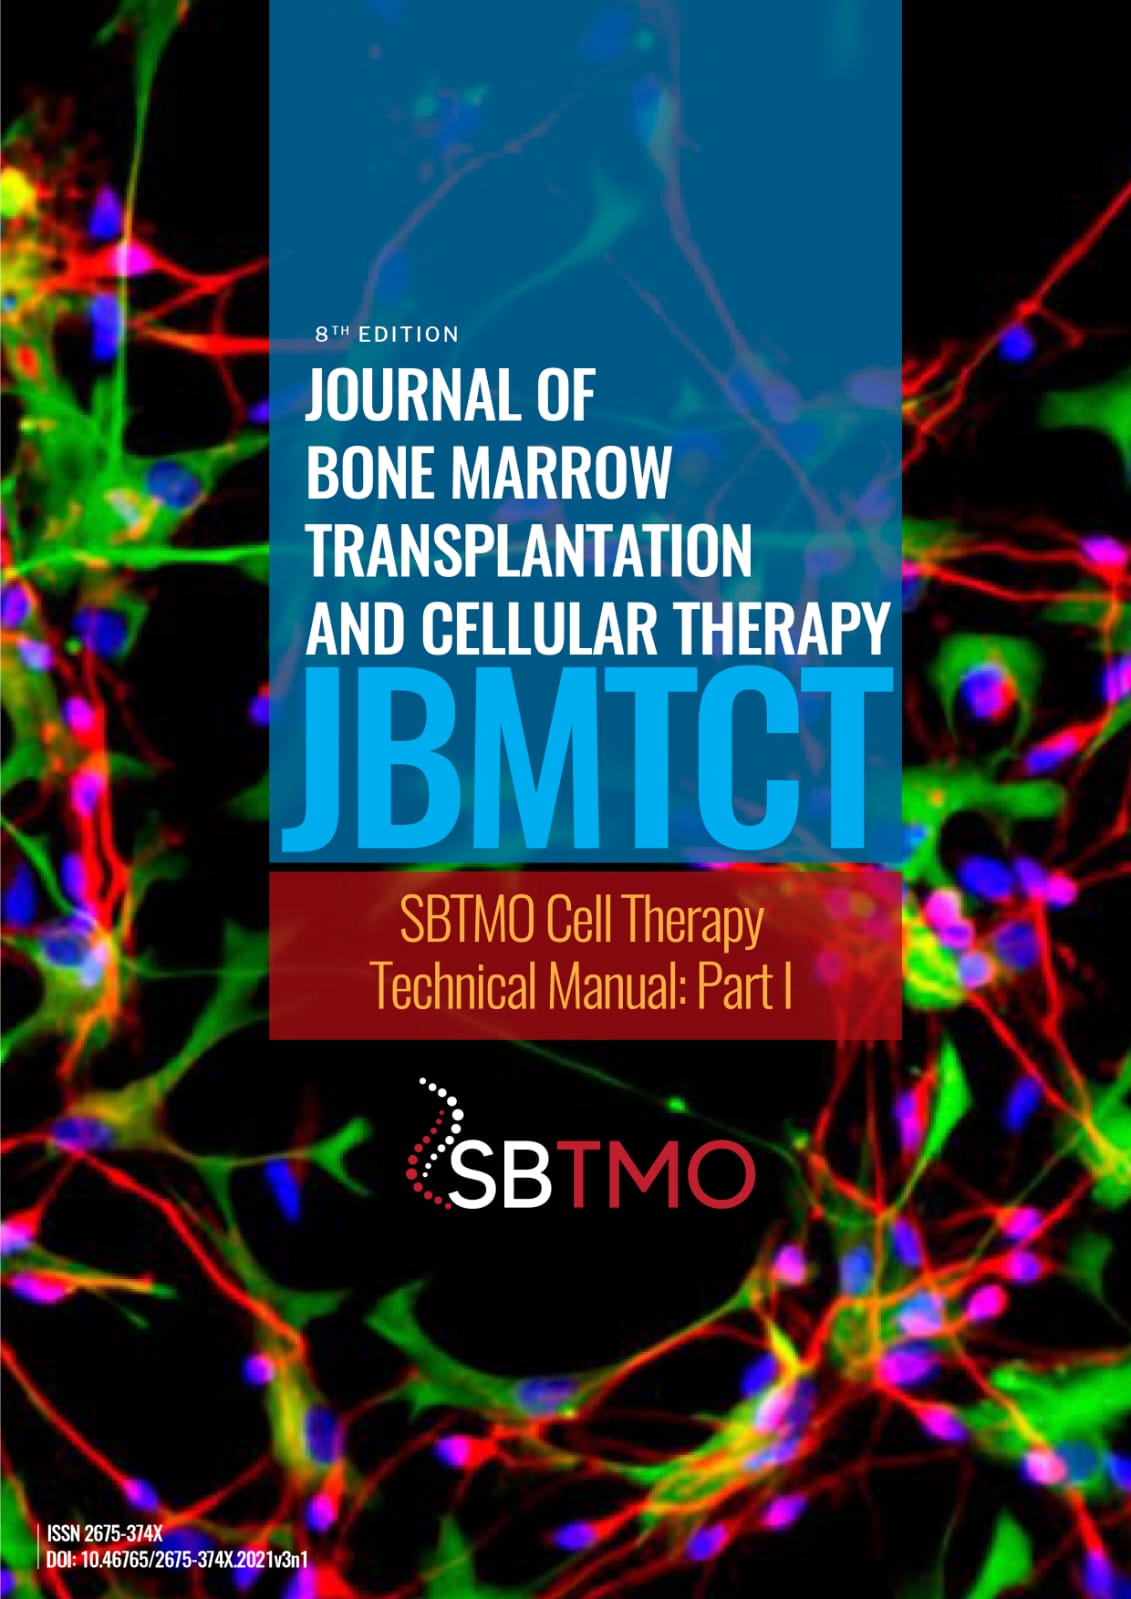 					View Vol. 3 No. 1 (2022):  JOURNAL OF BONE MARROW TRANSPLANTATION AND CELLULAR THERAPY
				